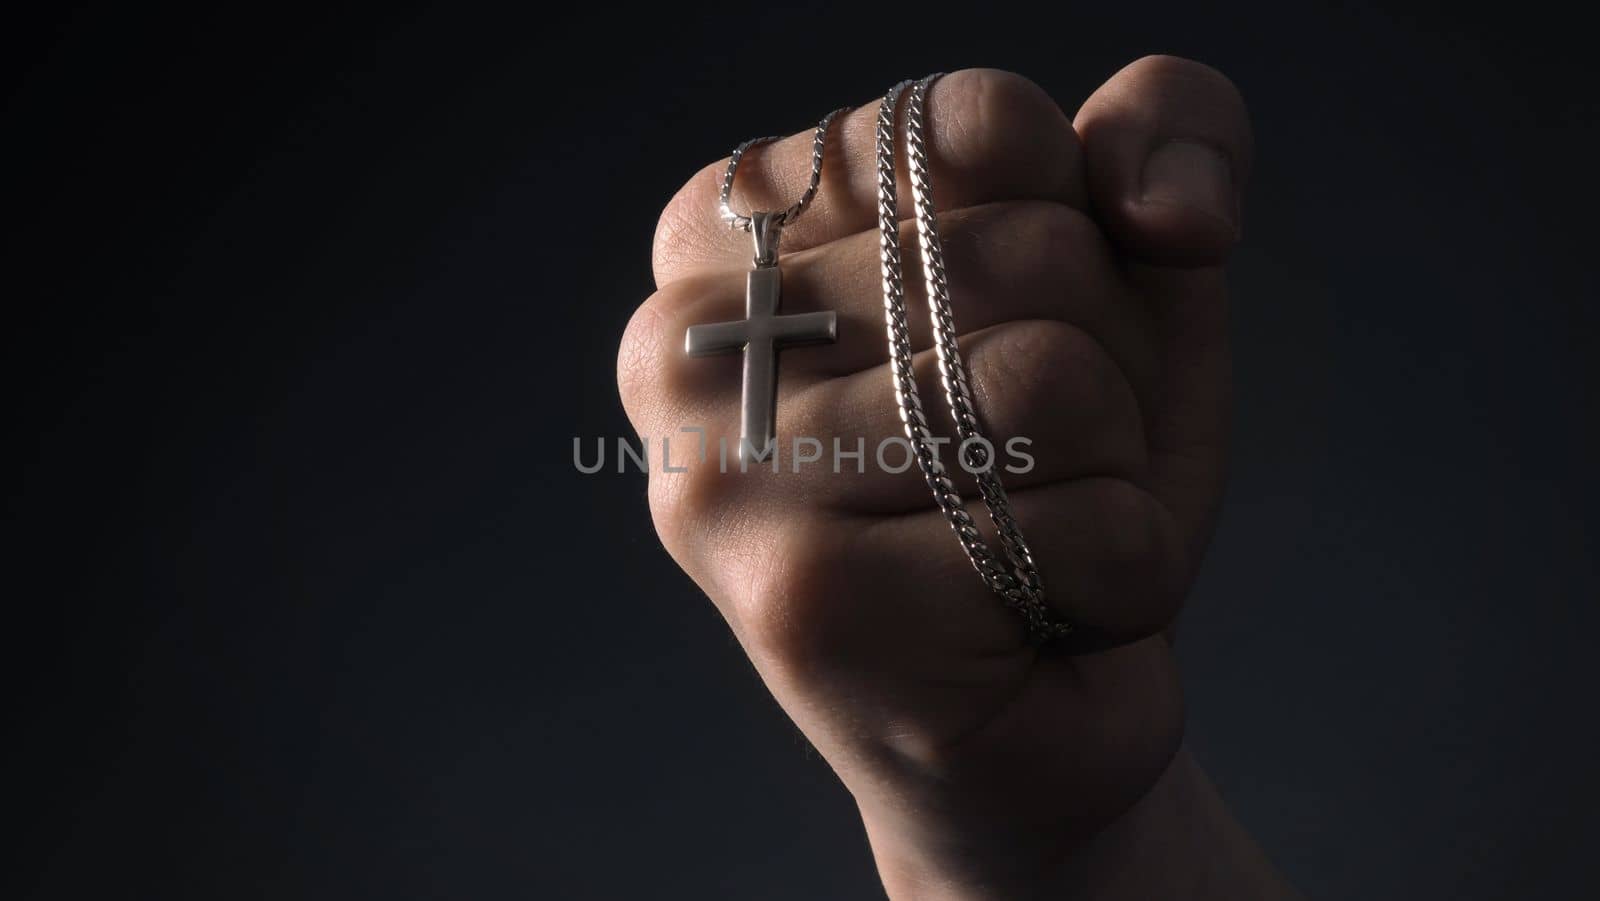 Close-up images of crucifix pendant and necklace in hand  by gnepphoto